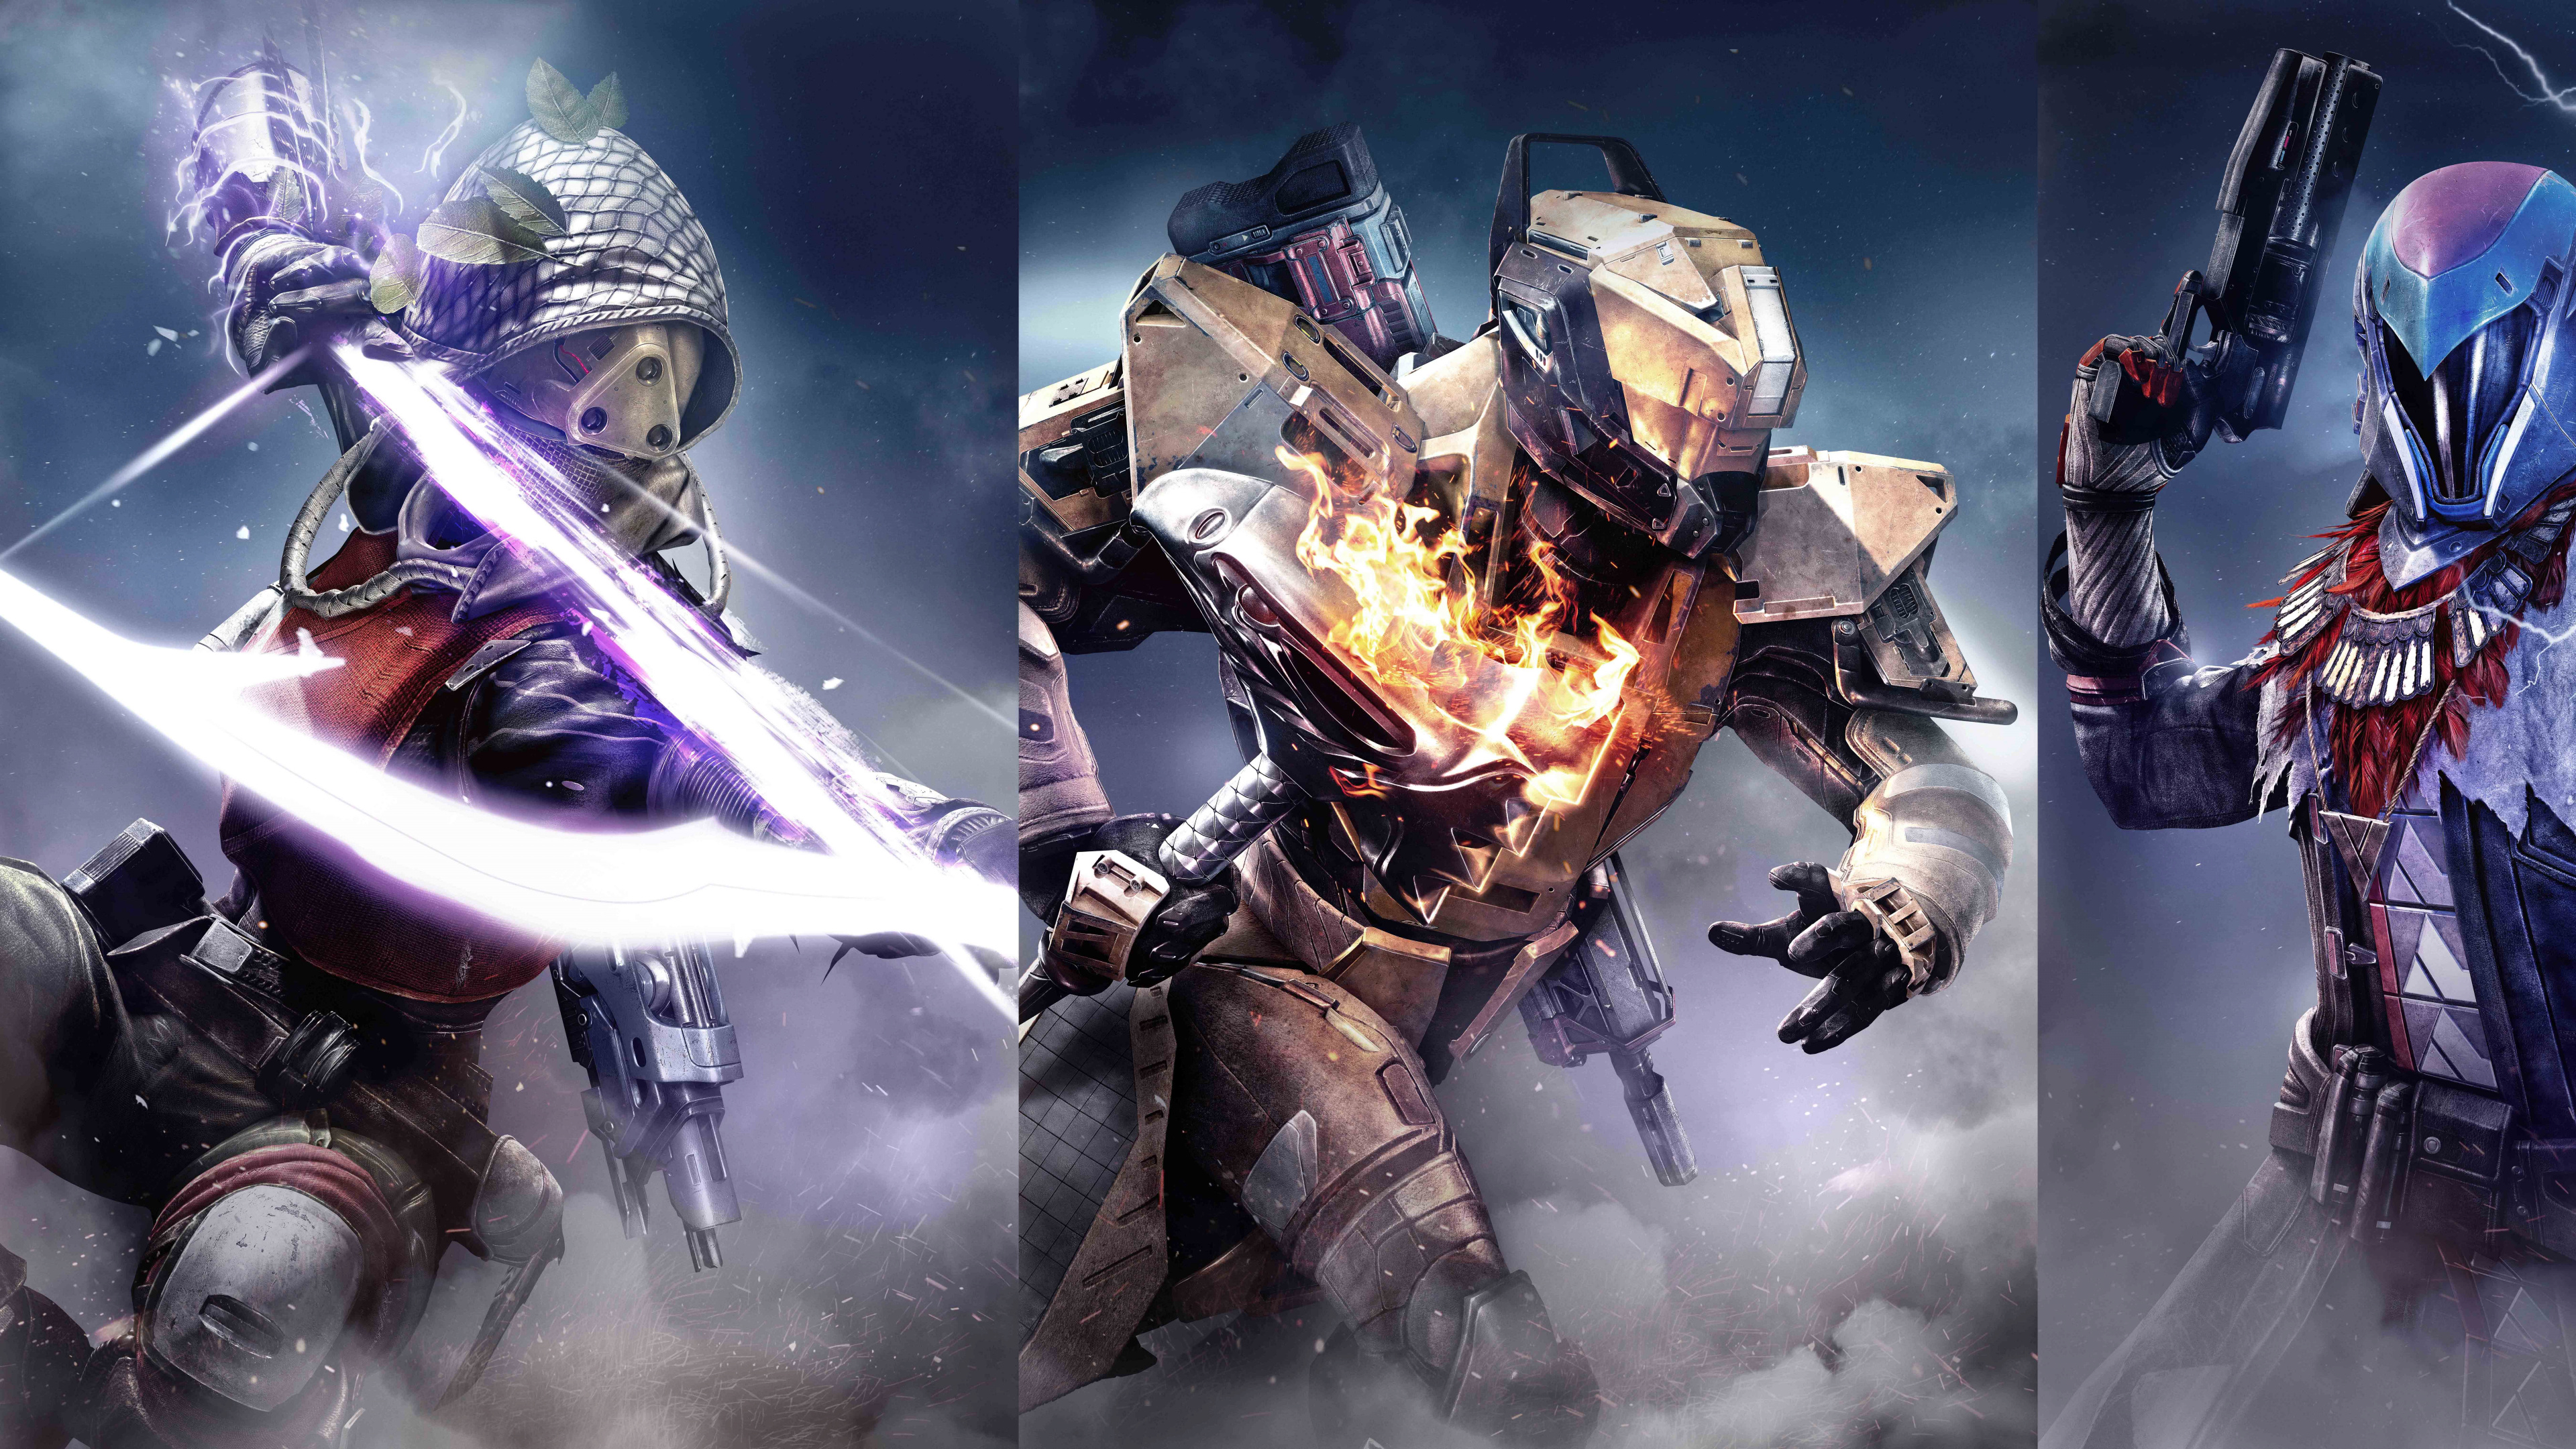 Download Destiny 2 wallpapers for mobile phone free Destiny 2 HD  pictures